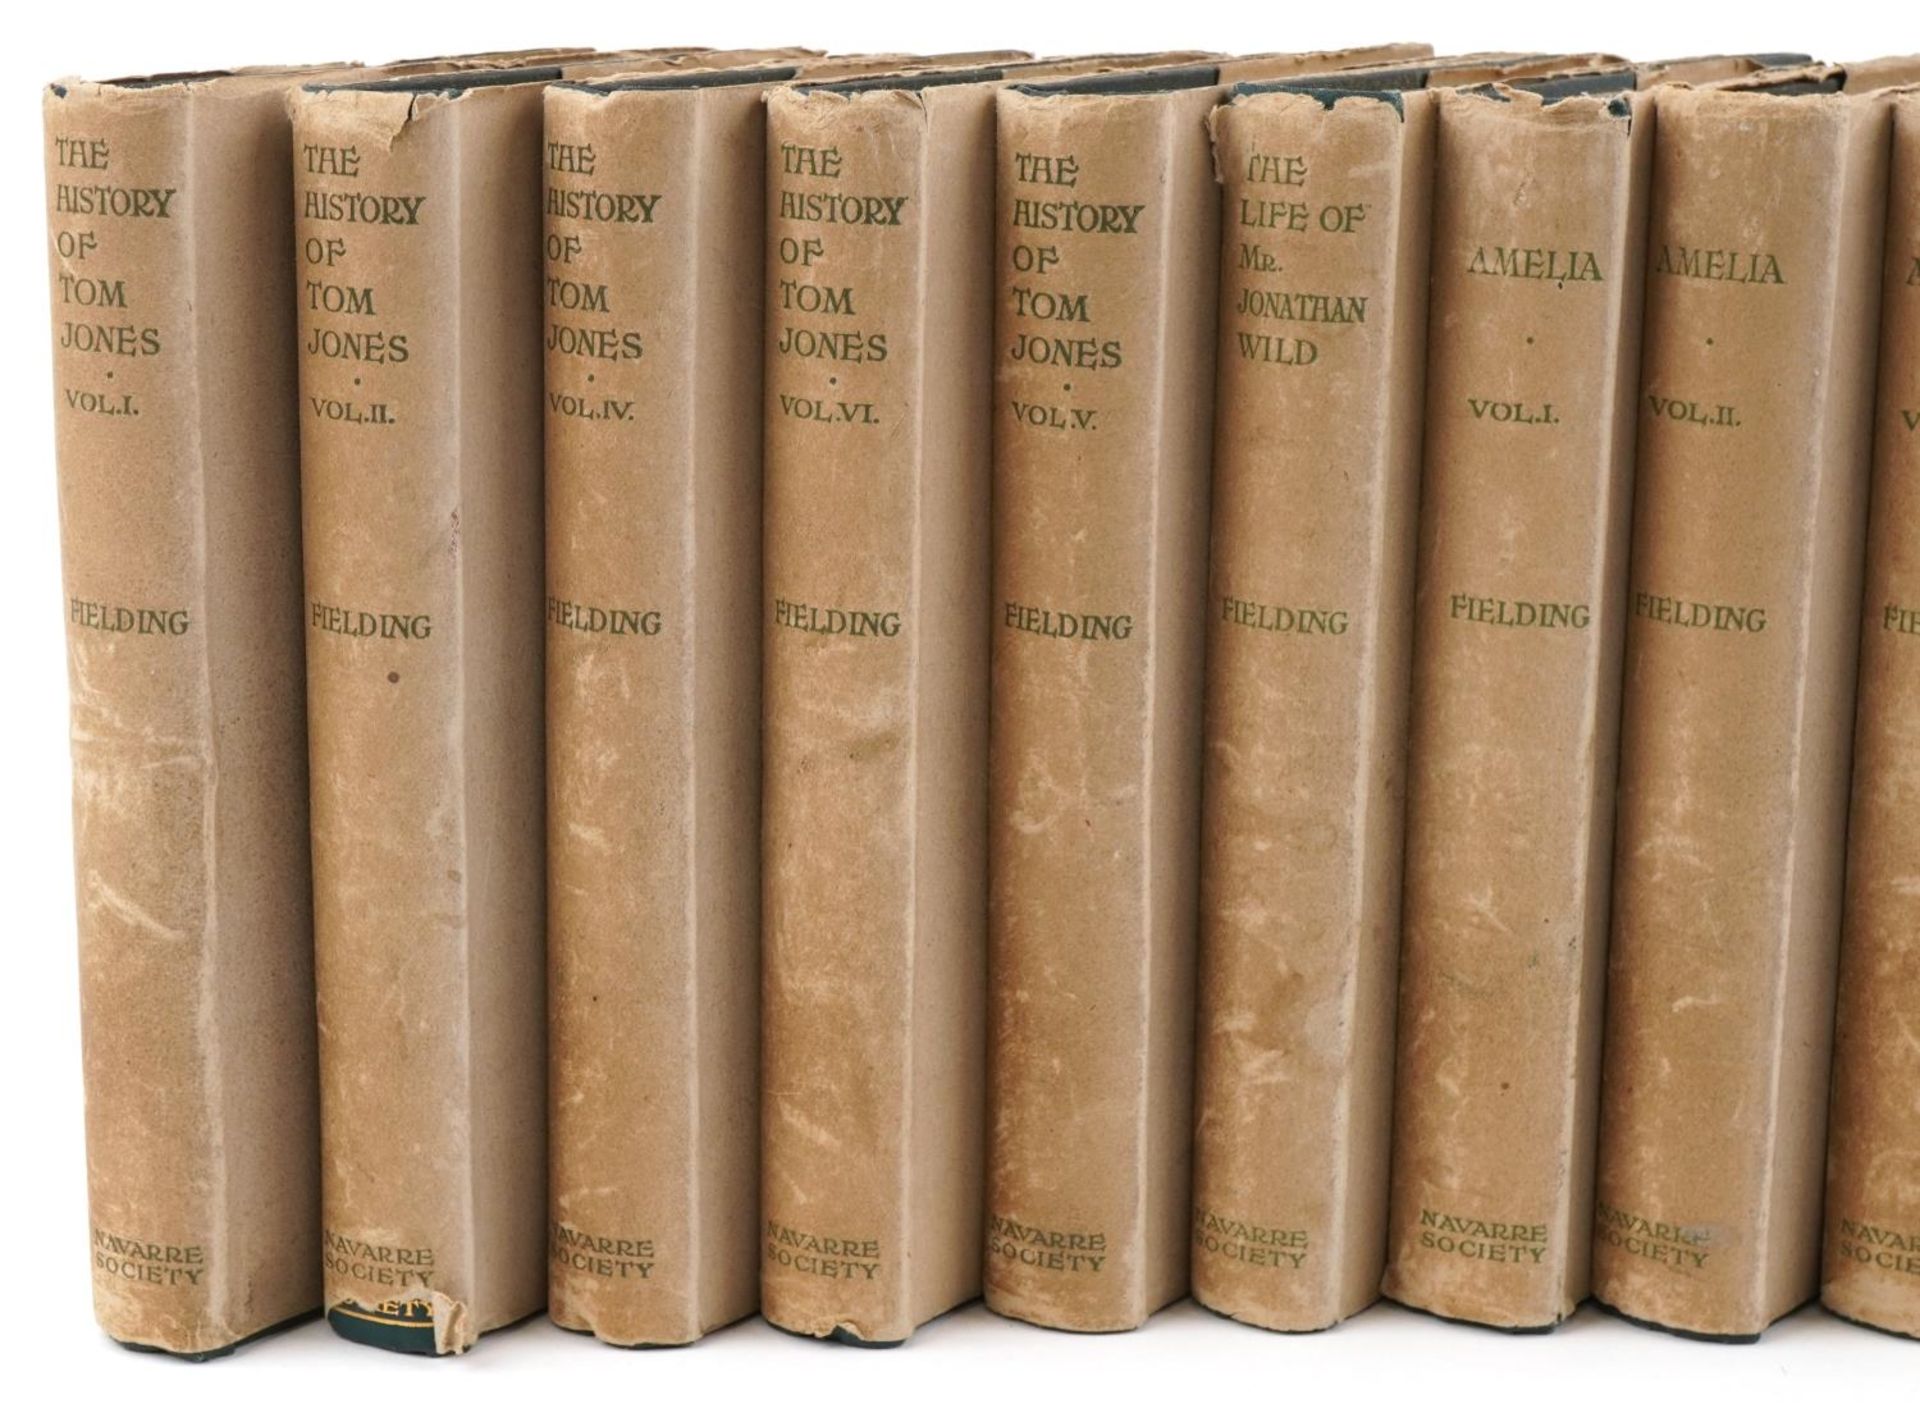 The Works of Henry Fielding, set of twelve Navarre Society hardback books with dust jackets - Image 4 of 10